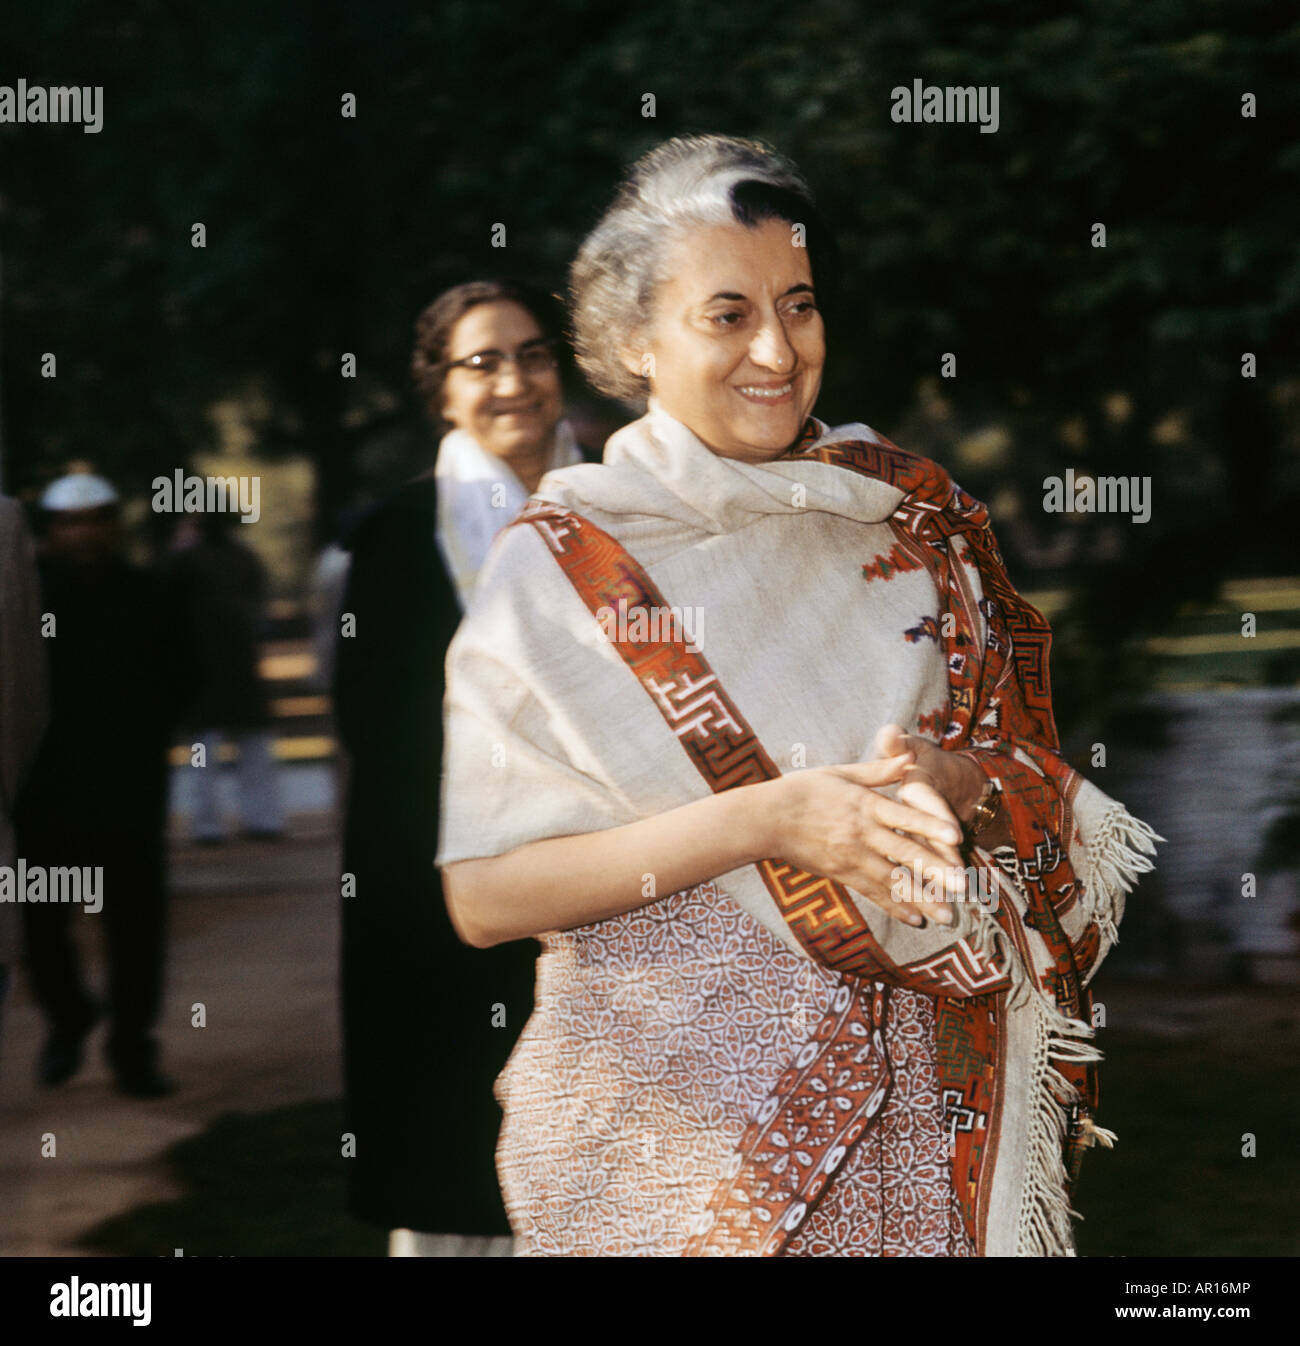 Indira Gandhi,IndianP.M1966-1977,&1980-1984.Only womanP.M.Daughter of Nehru.Defeated Pakistan 1971.Lst,re-elected assasinate1984 Stock Photo